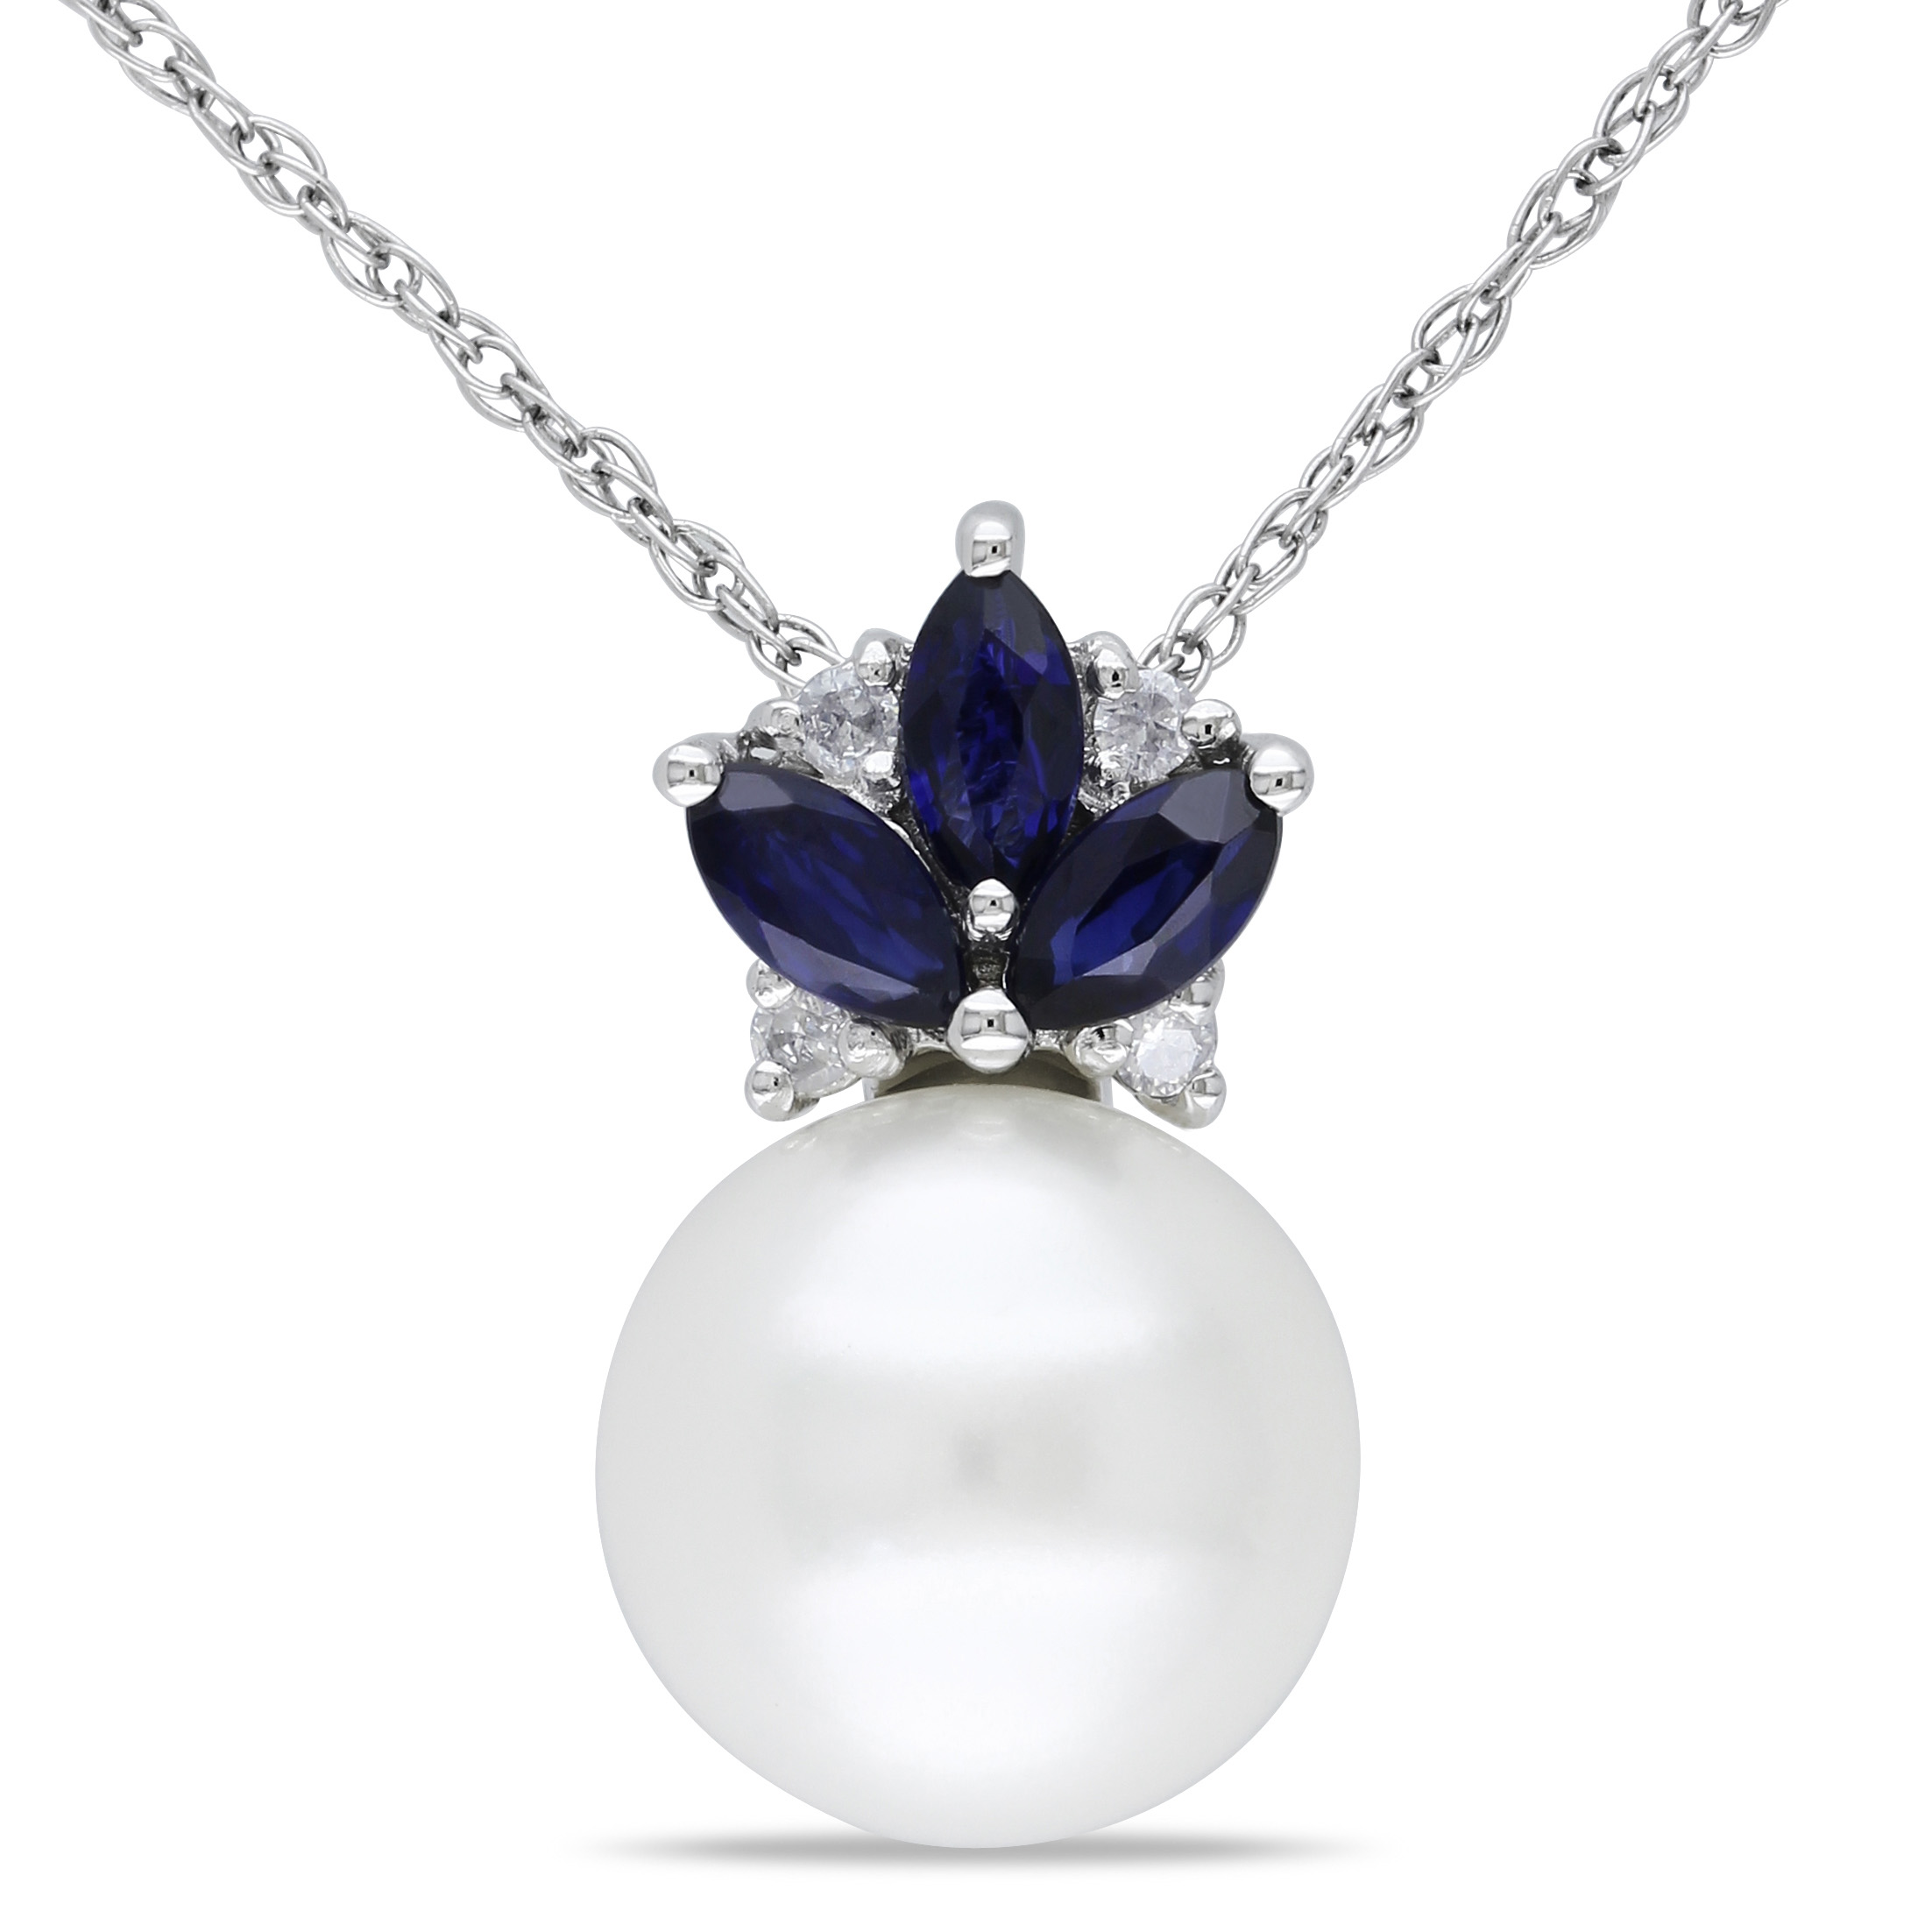 8.5 - 9 MM Cultured Freshwater Pearl, Diamond and Sapphire Floral Pendant with Singapore Chain in 10k White Gold